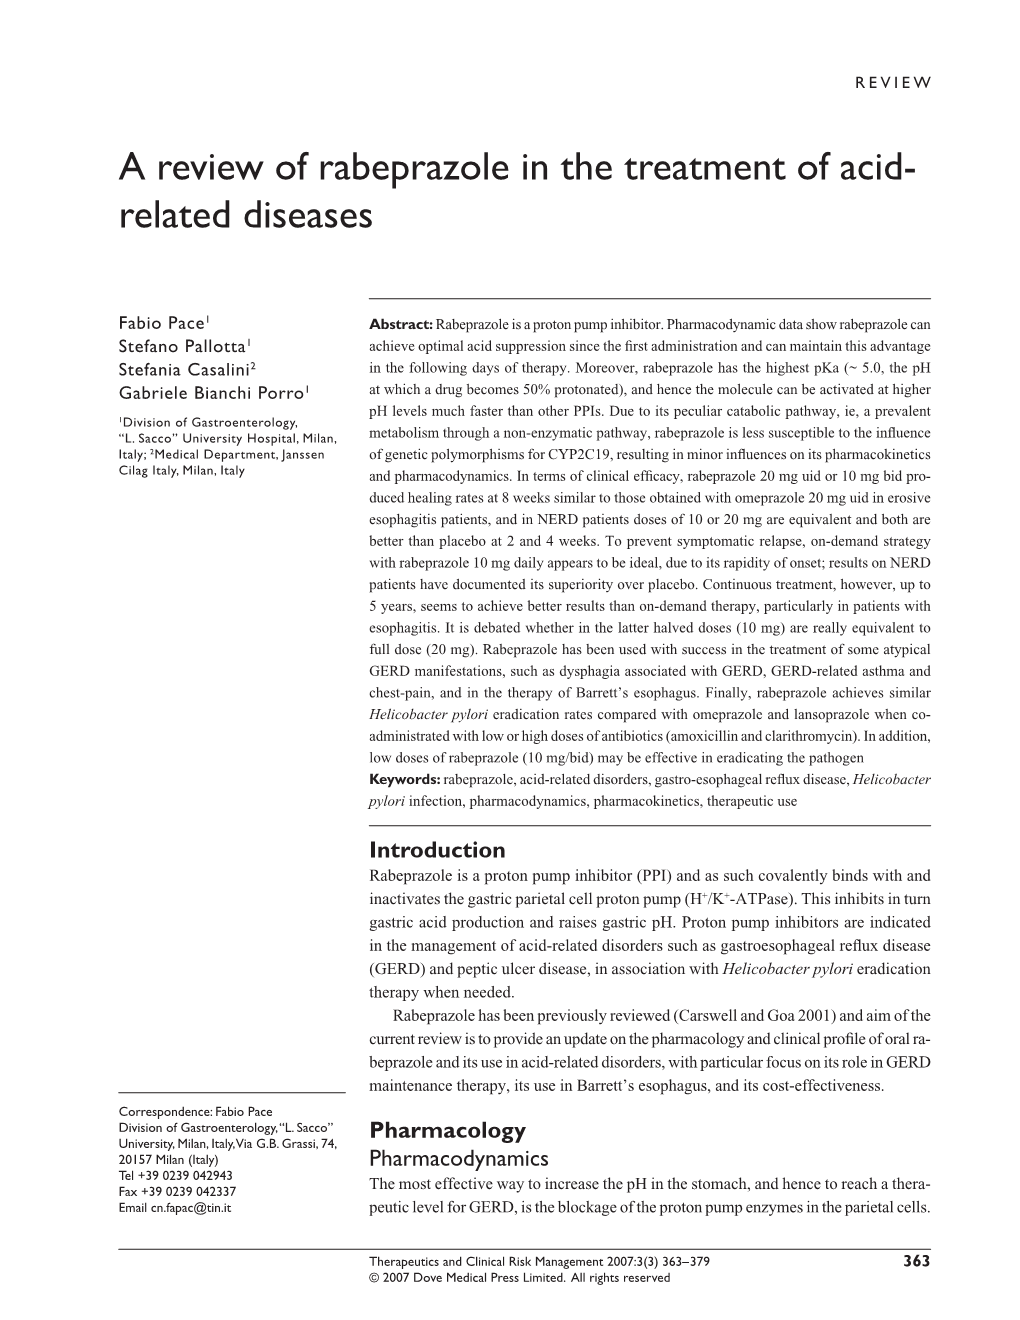 A Review of Rabeprazole in the Treatment of Acid- Related Diseases